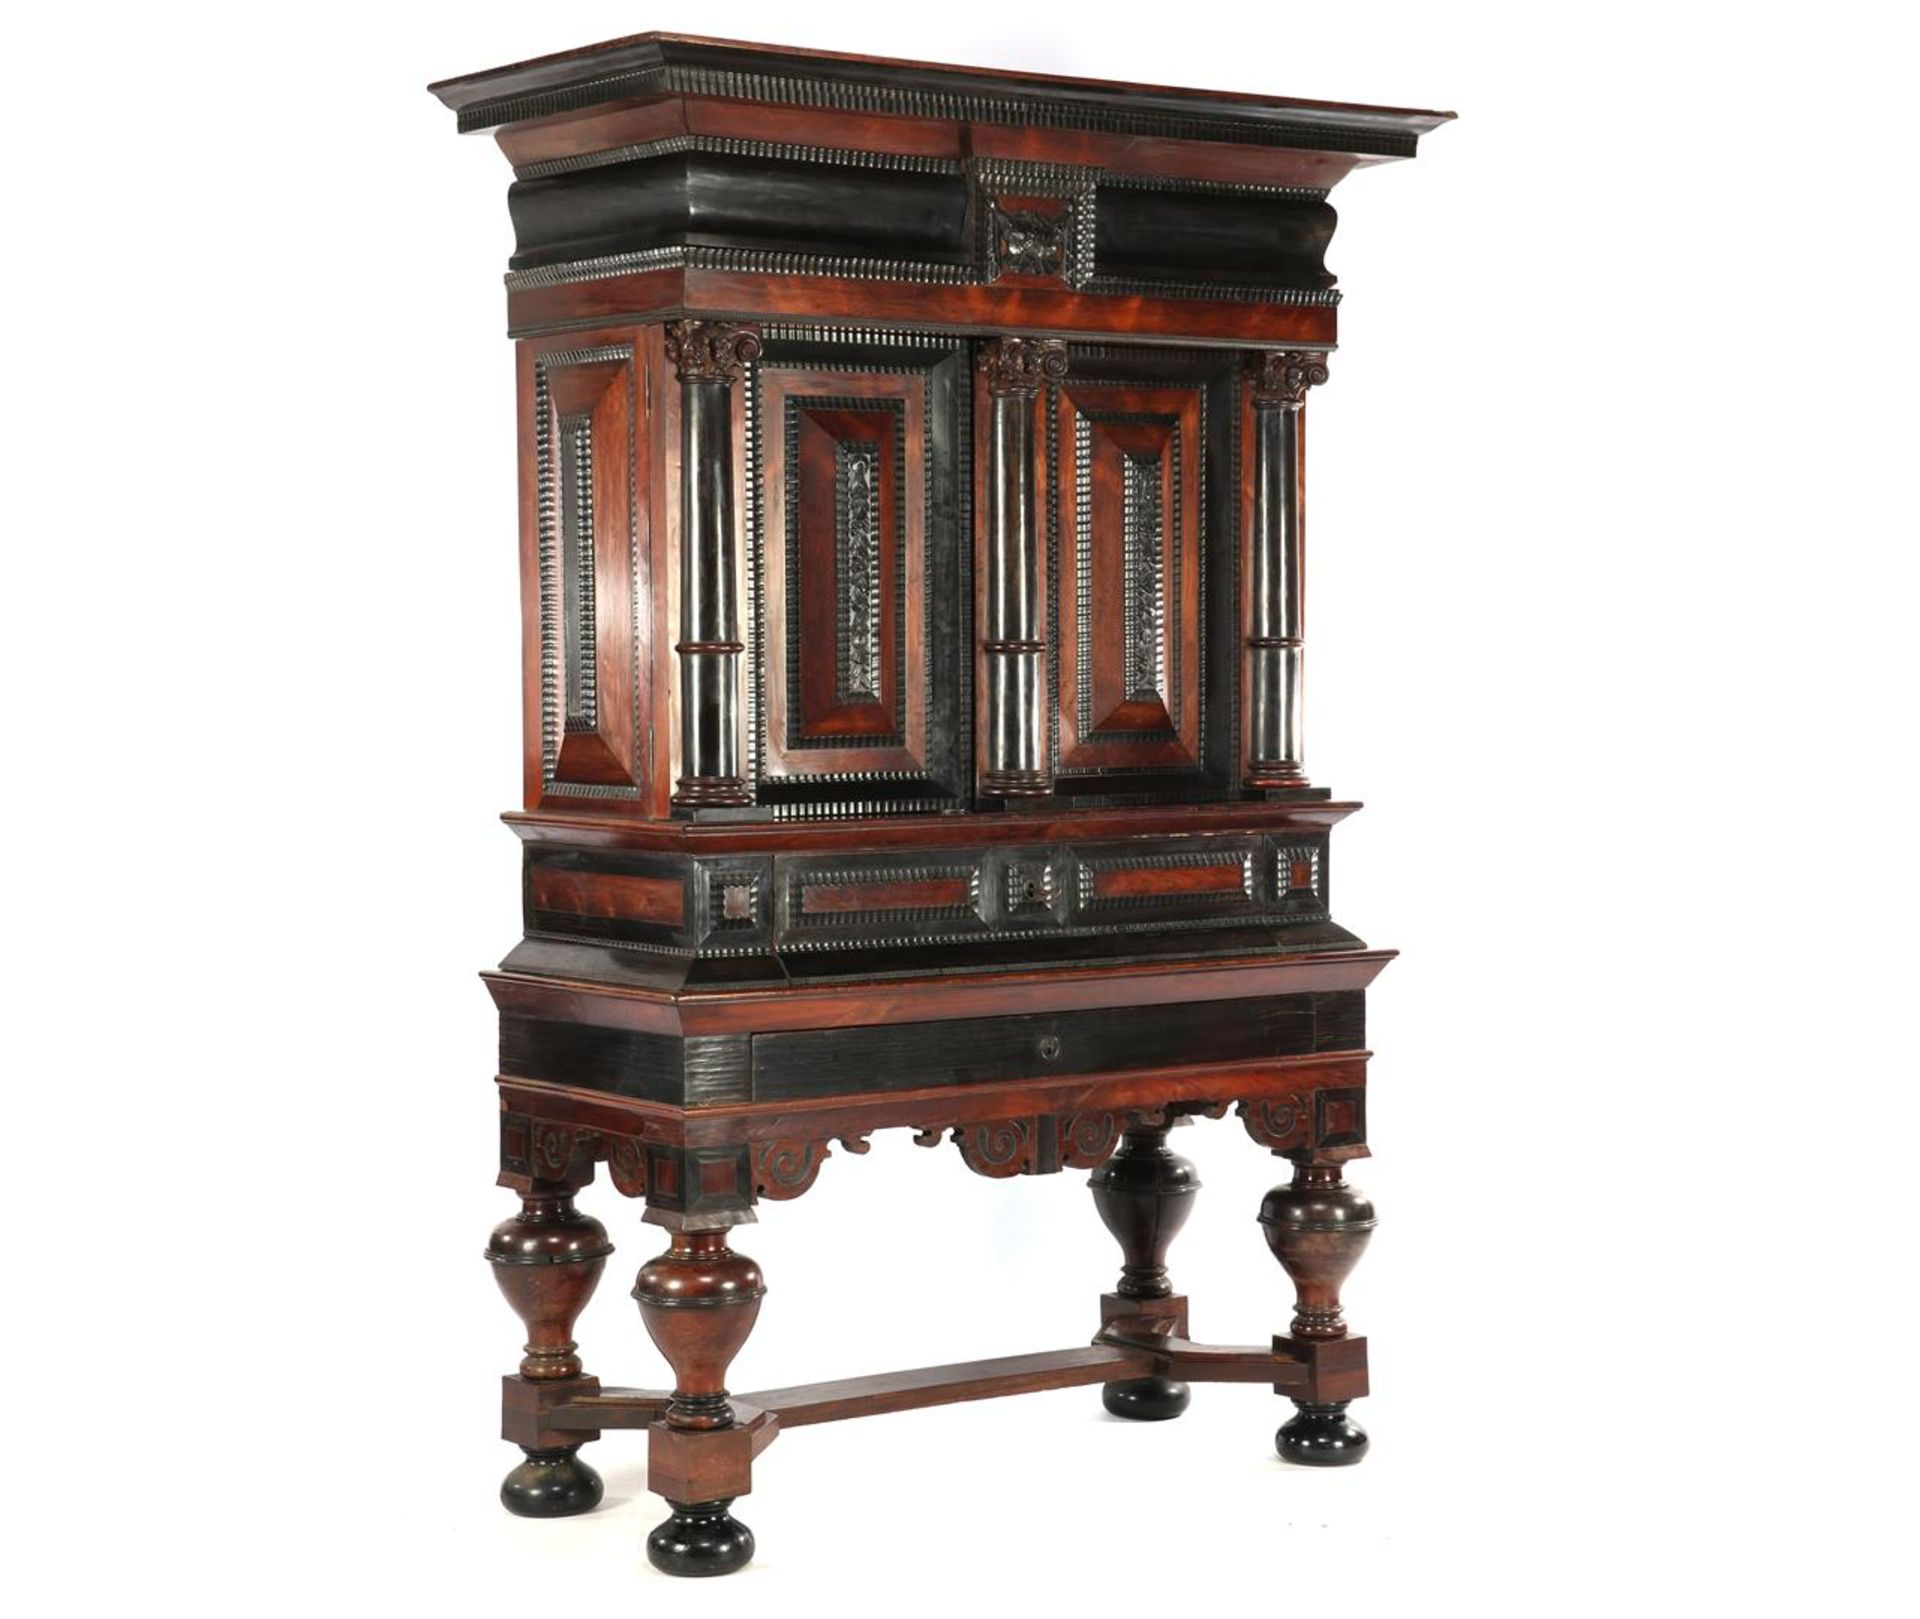 Antique cushion cupboard with columns